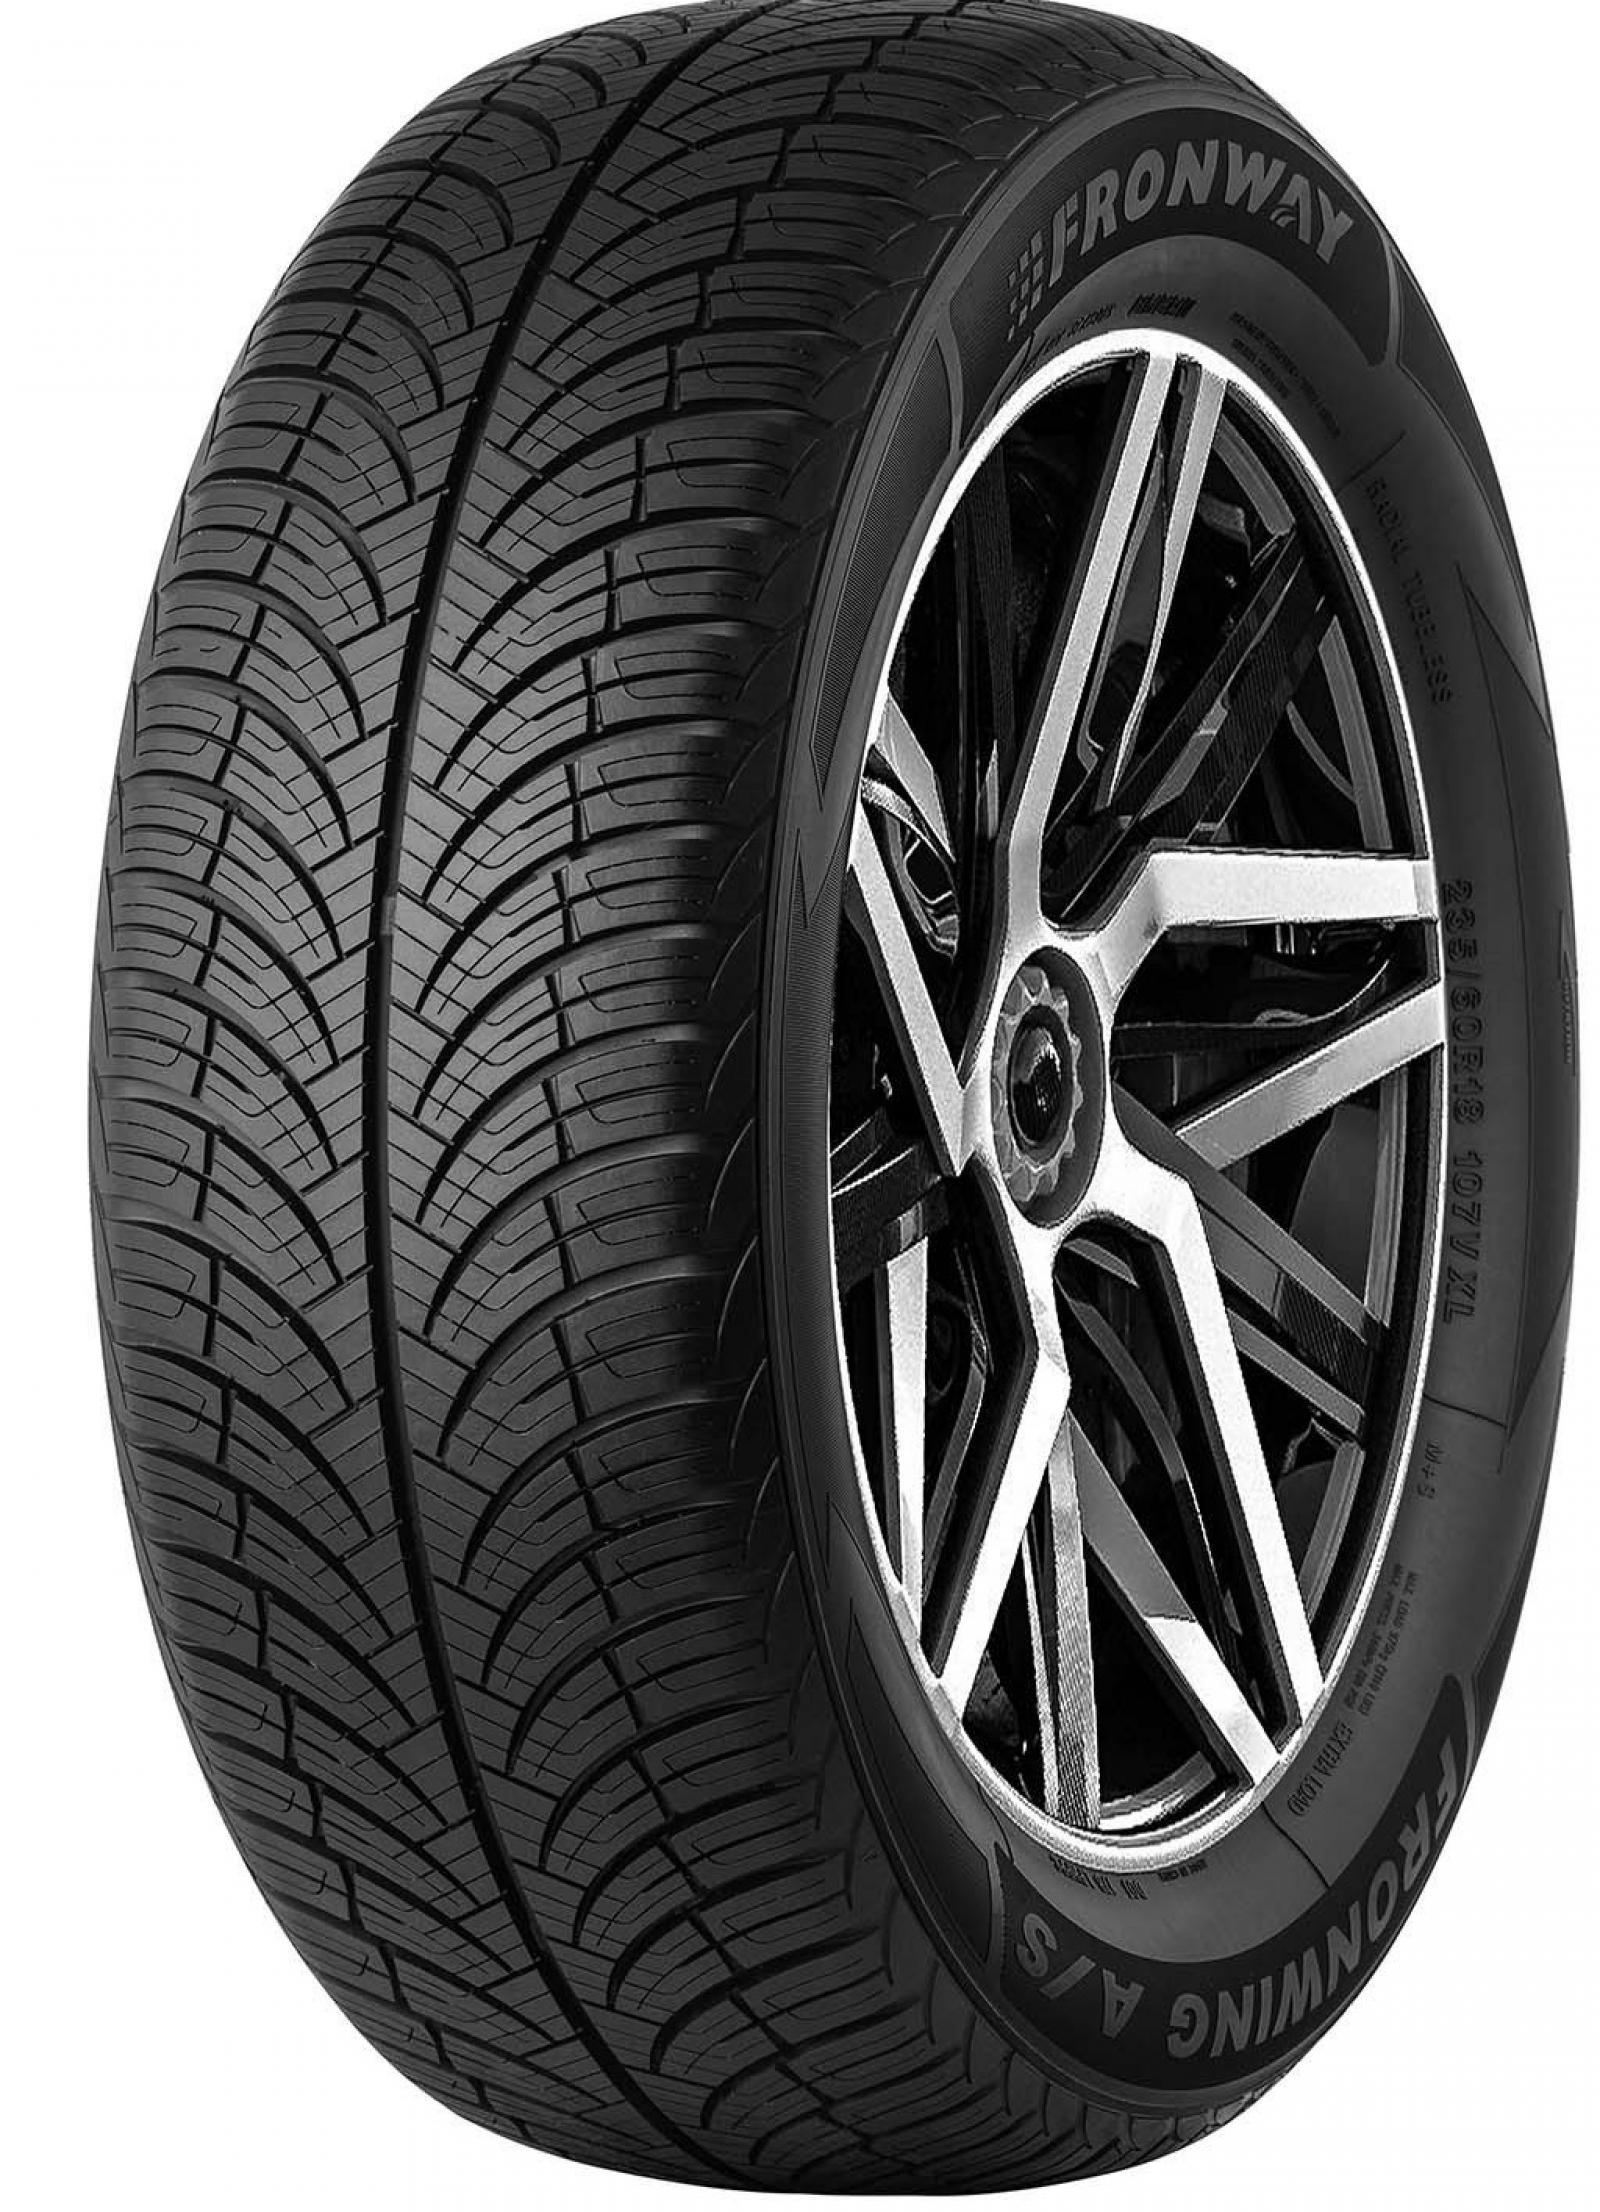 Fronwing A/S 175/70R13